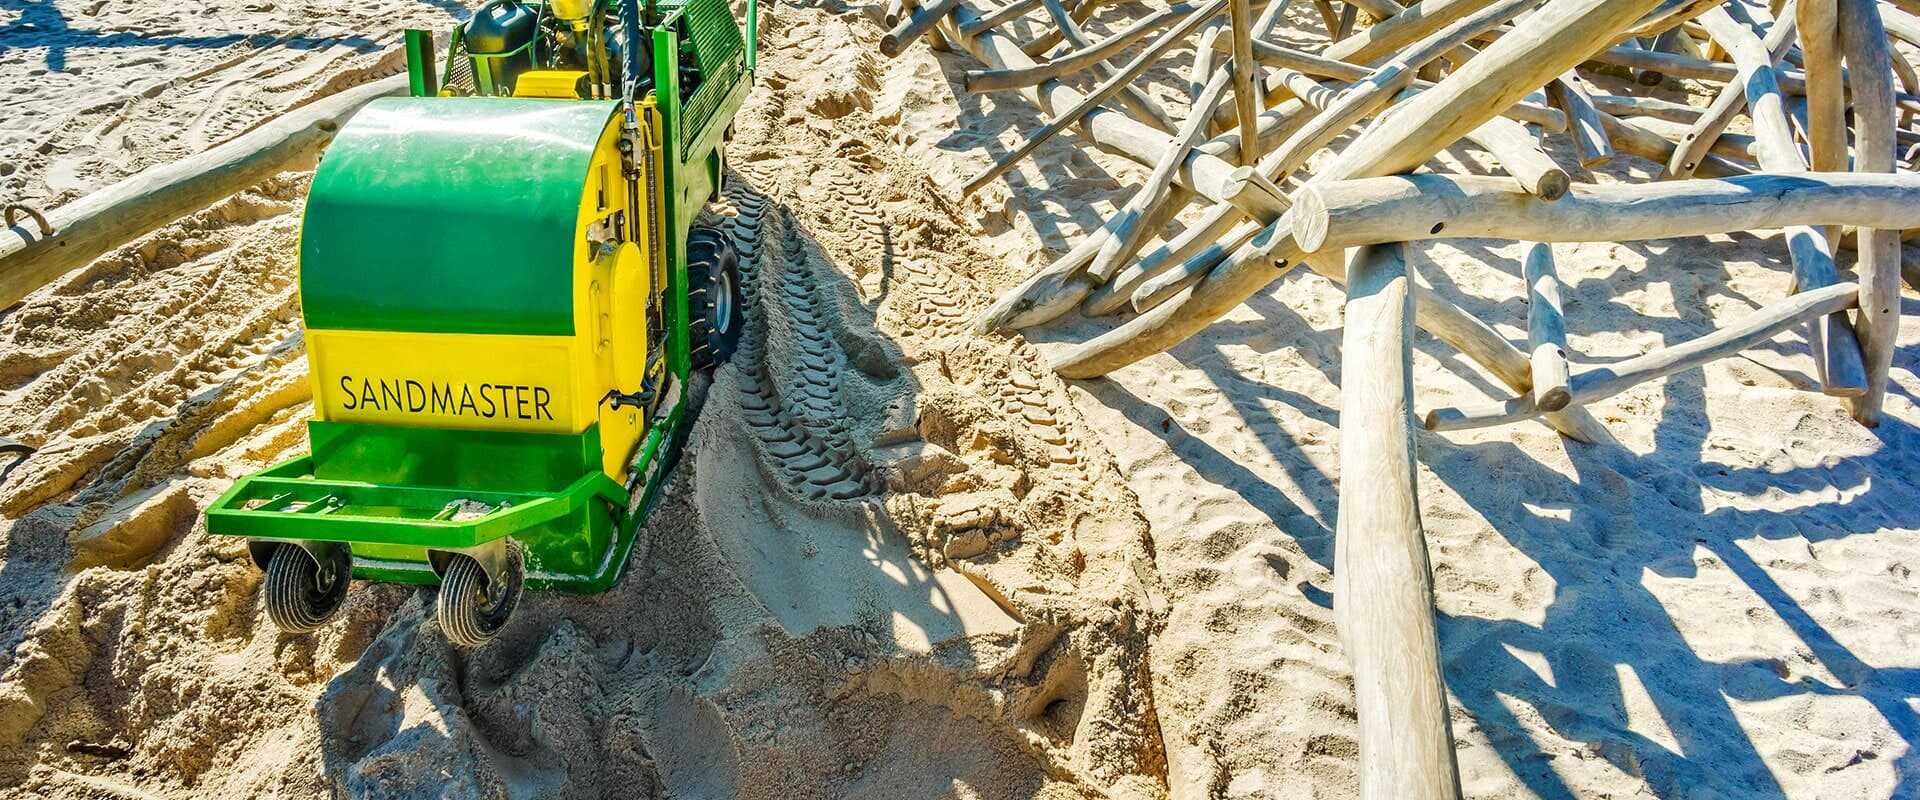 sand and gravel cleaning from Sandmaster